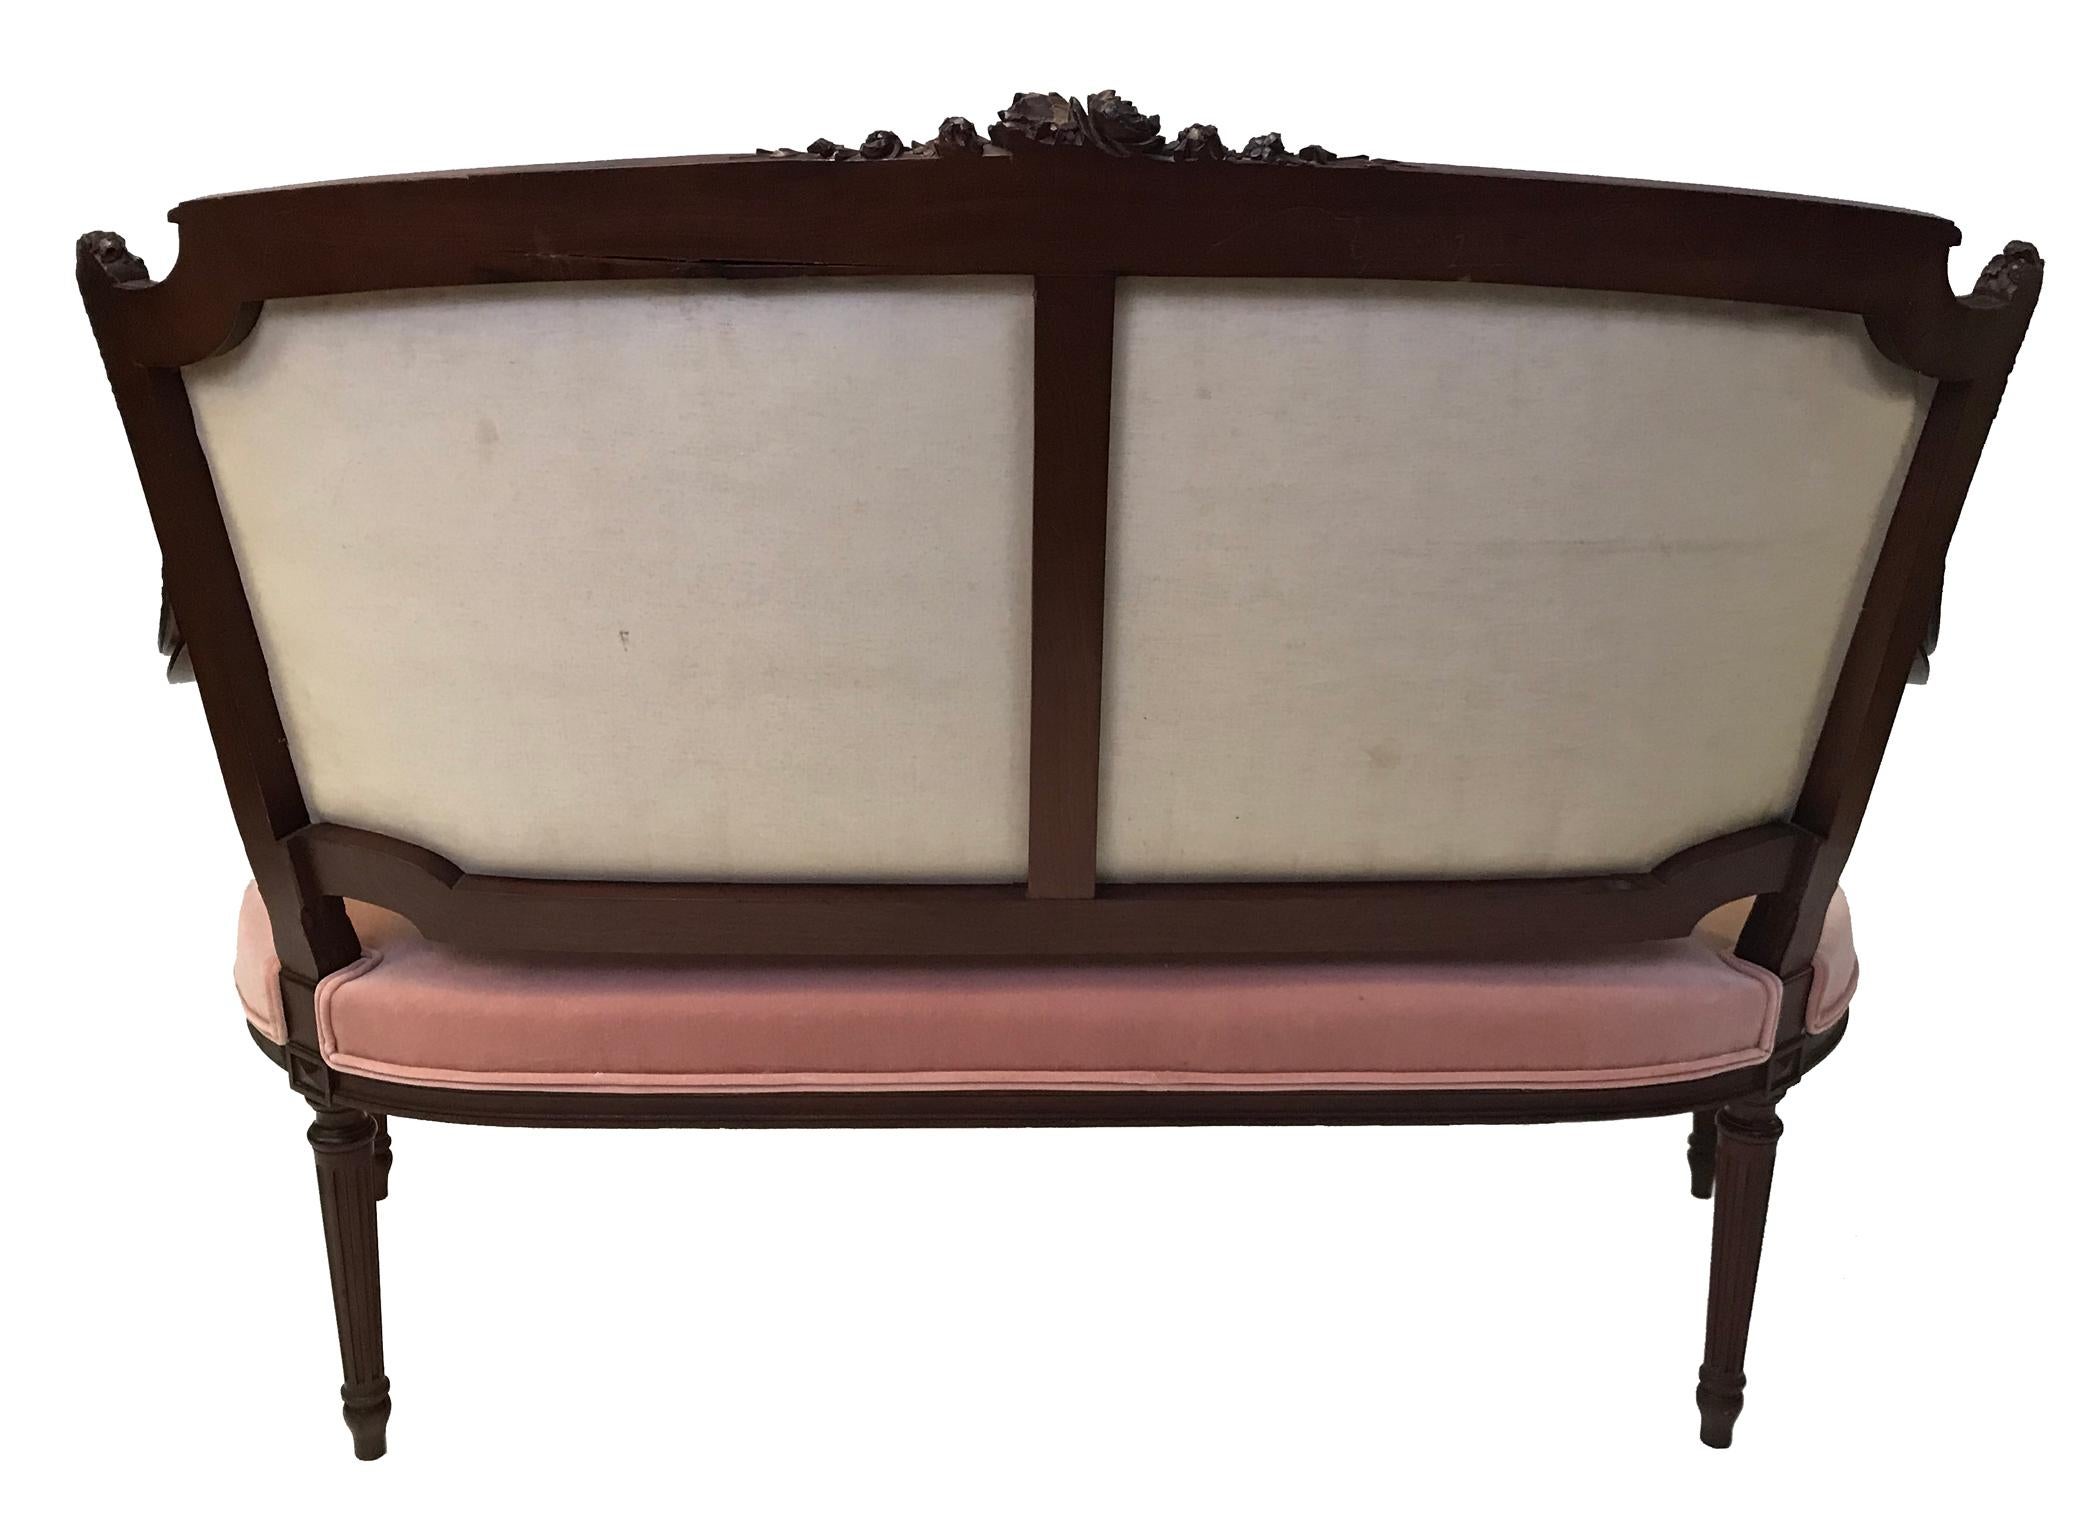 Beautifully carved mahogany with foliate and rose decoration, this striking Belle Époque settee is crafted in the typical manner of the Louis XVI taste during the fourth quarter of the 19th century. This has been recently upholstered in rose pink